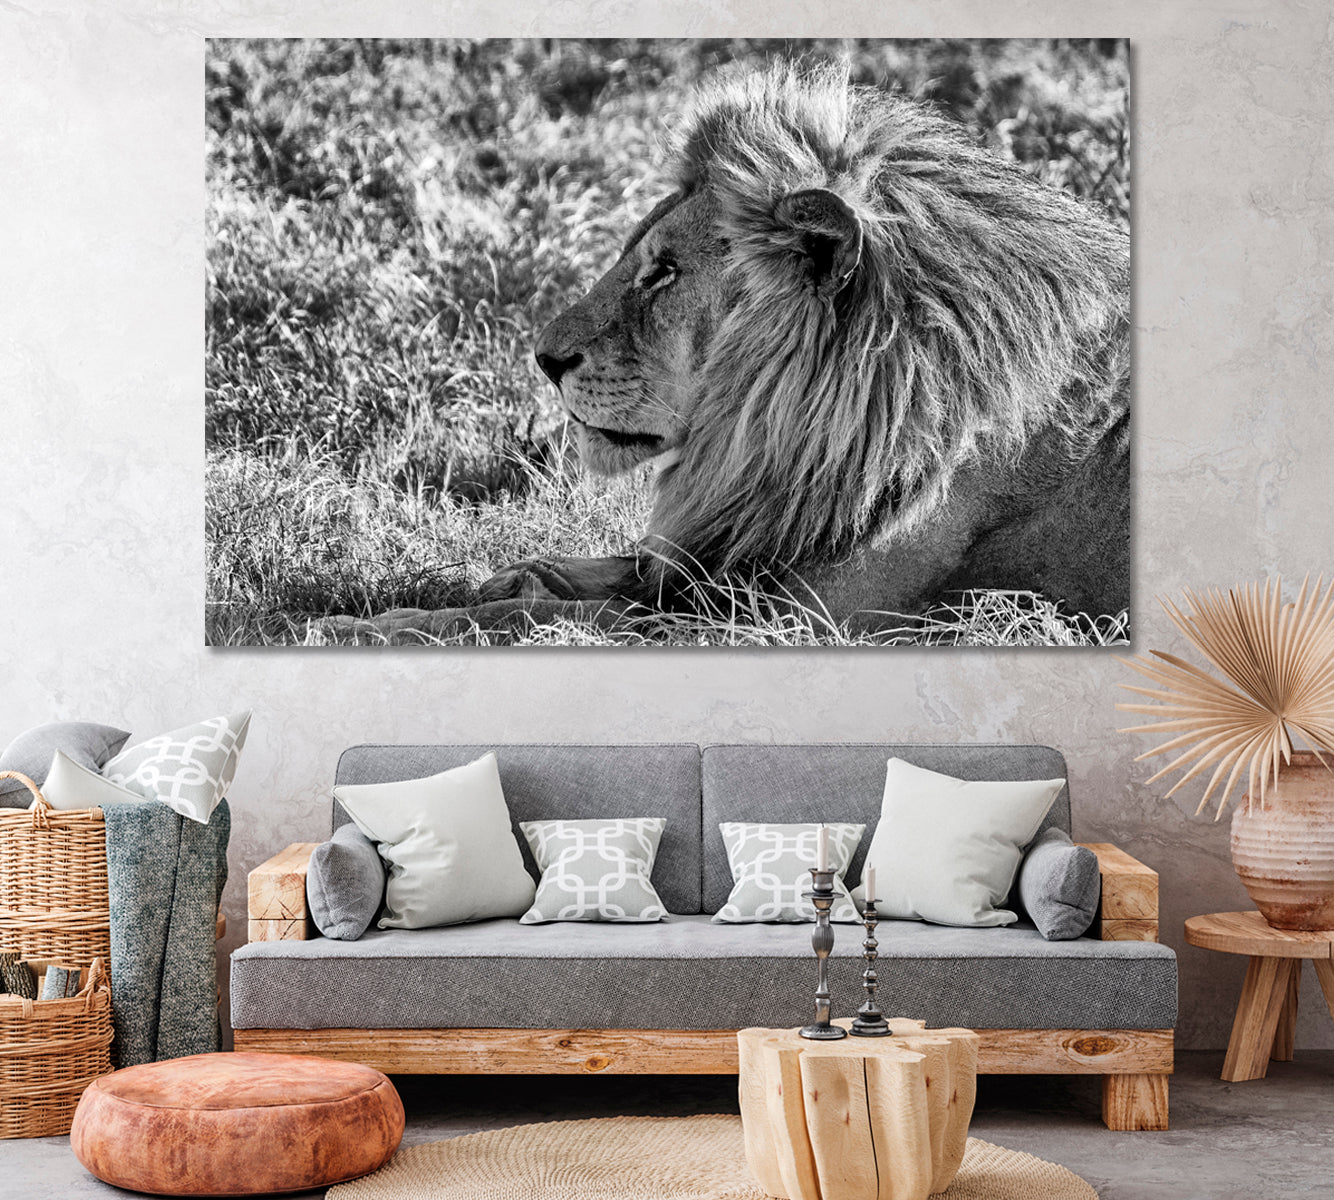 African Lion in Black and White Canvas Print ArtLexy 1 Panel 24"x16" inches 